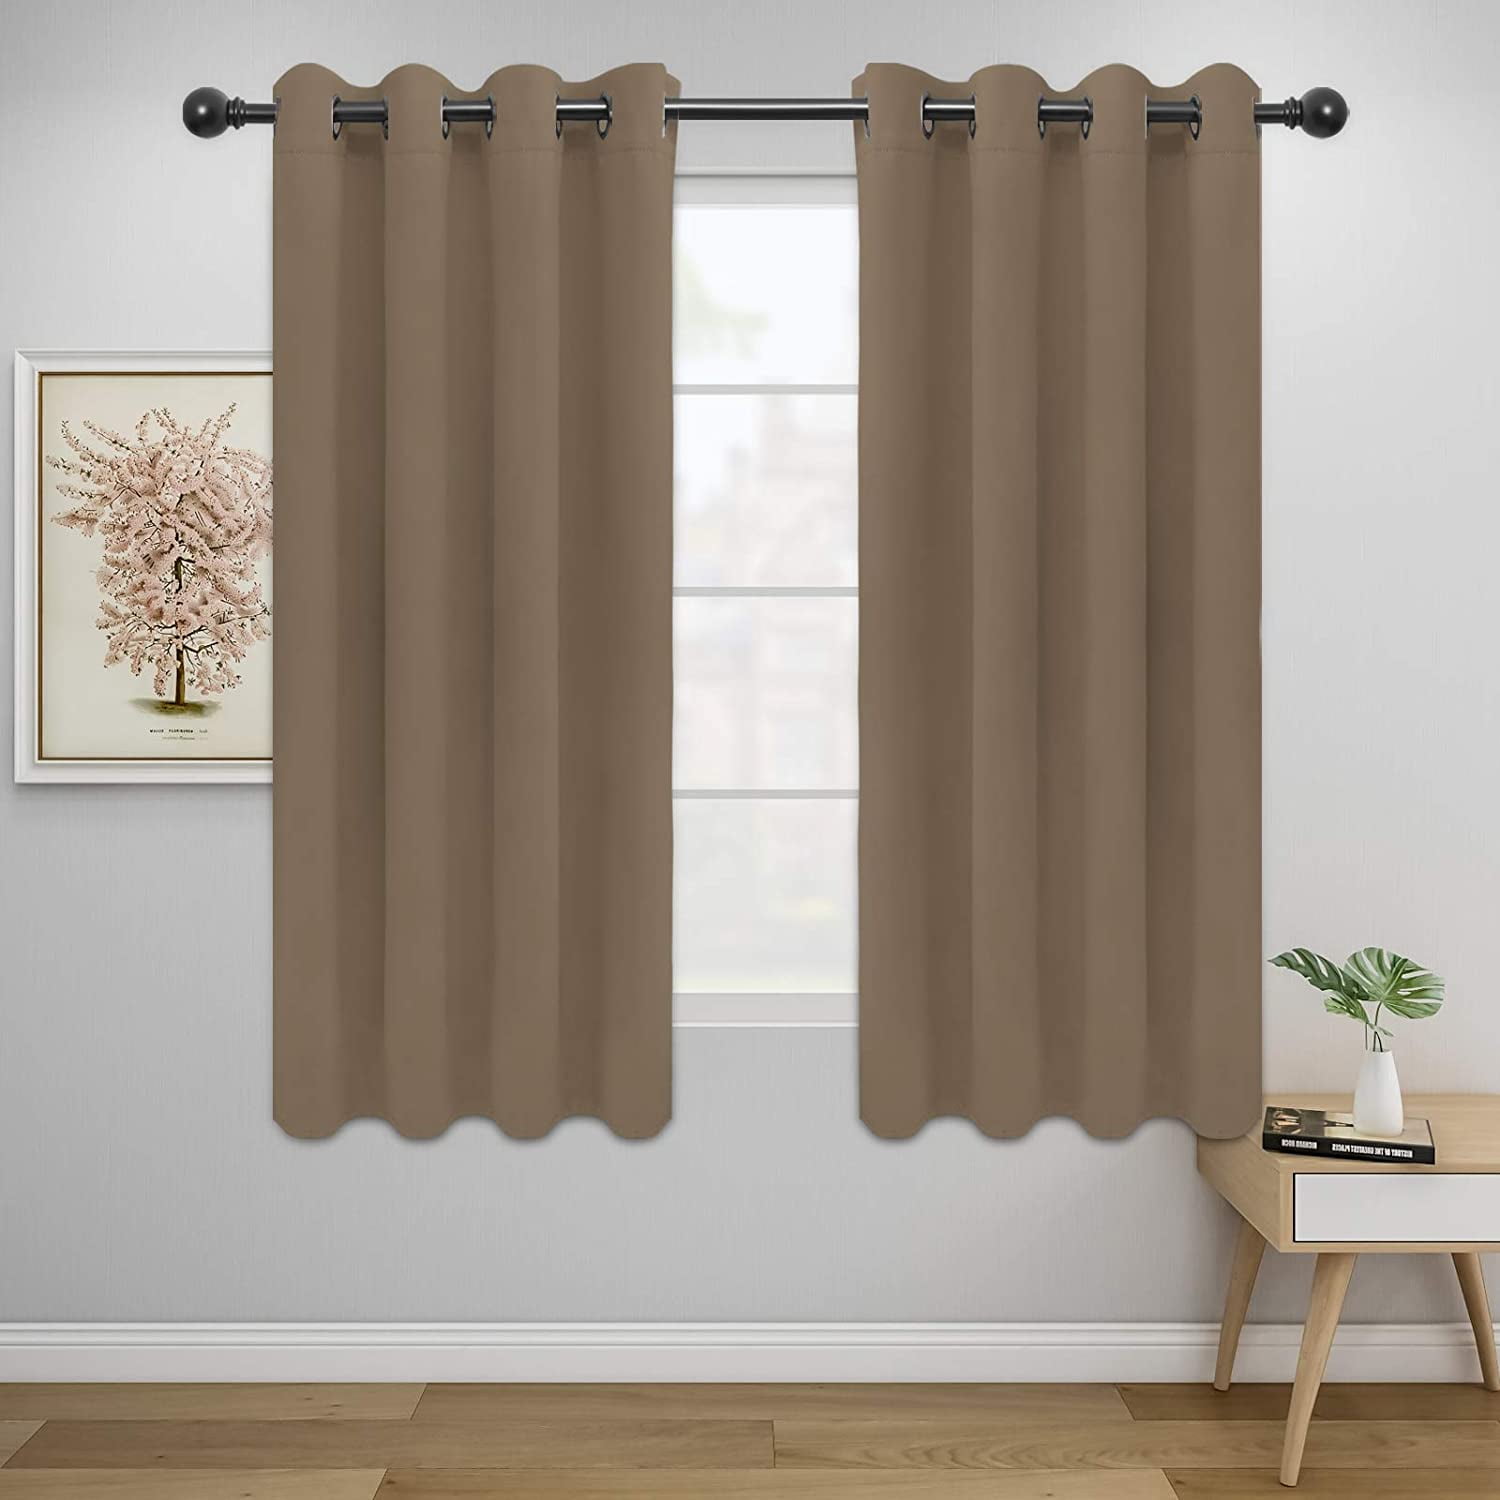 1 SET INSULATE THERMAL SHORT UNLINED PANELS WINDOW CURTAIN 100% BLACKOUT 54" L 